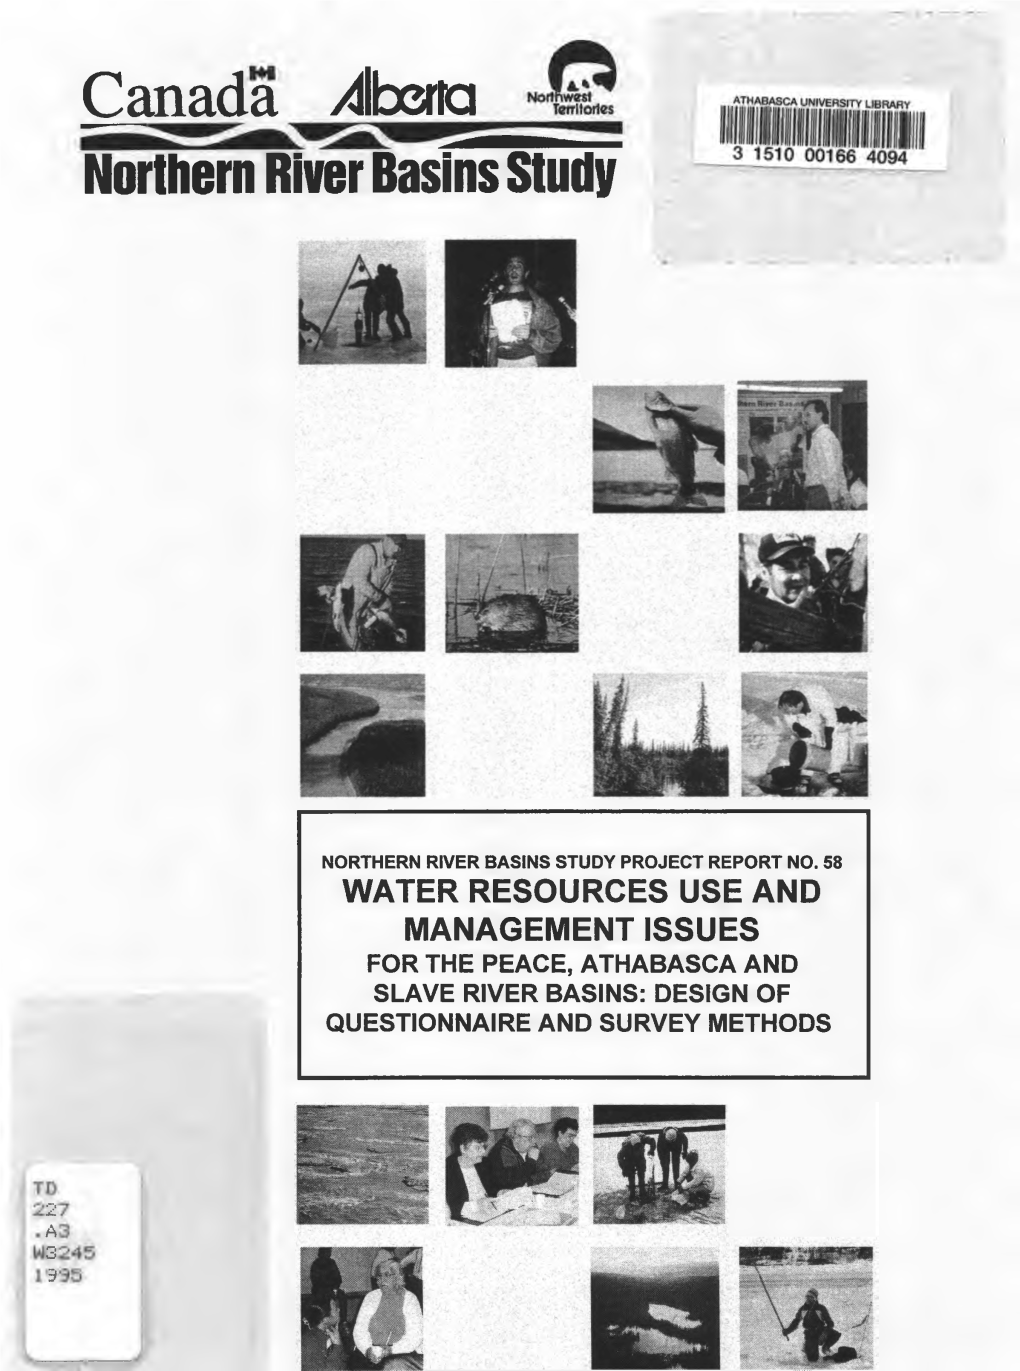 Report No. 58 Water Resources Use and Management Issues for the Peace, Athabasca and Slave River Basins: Design of Questionnaire and Survey Methods